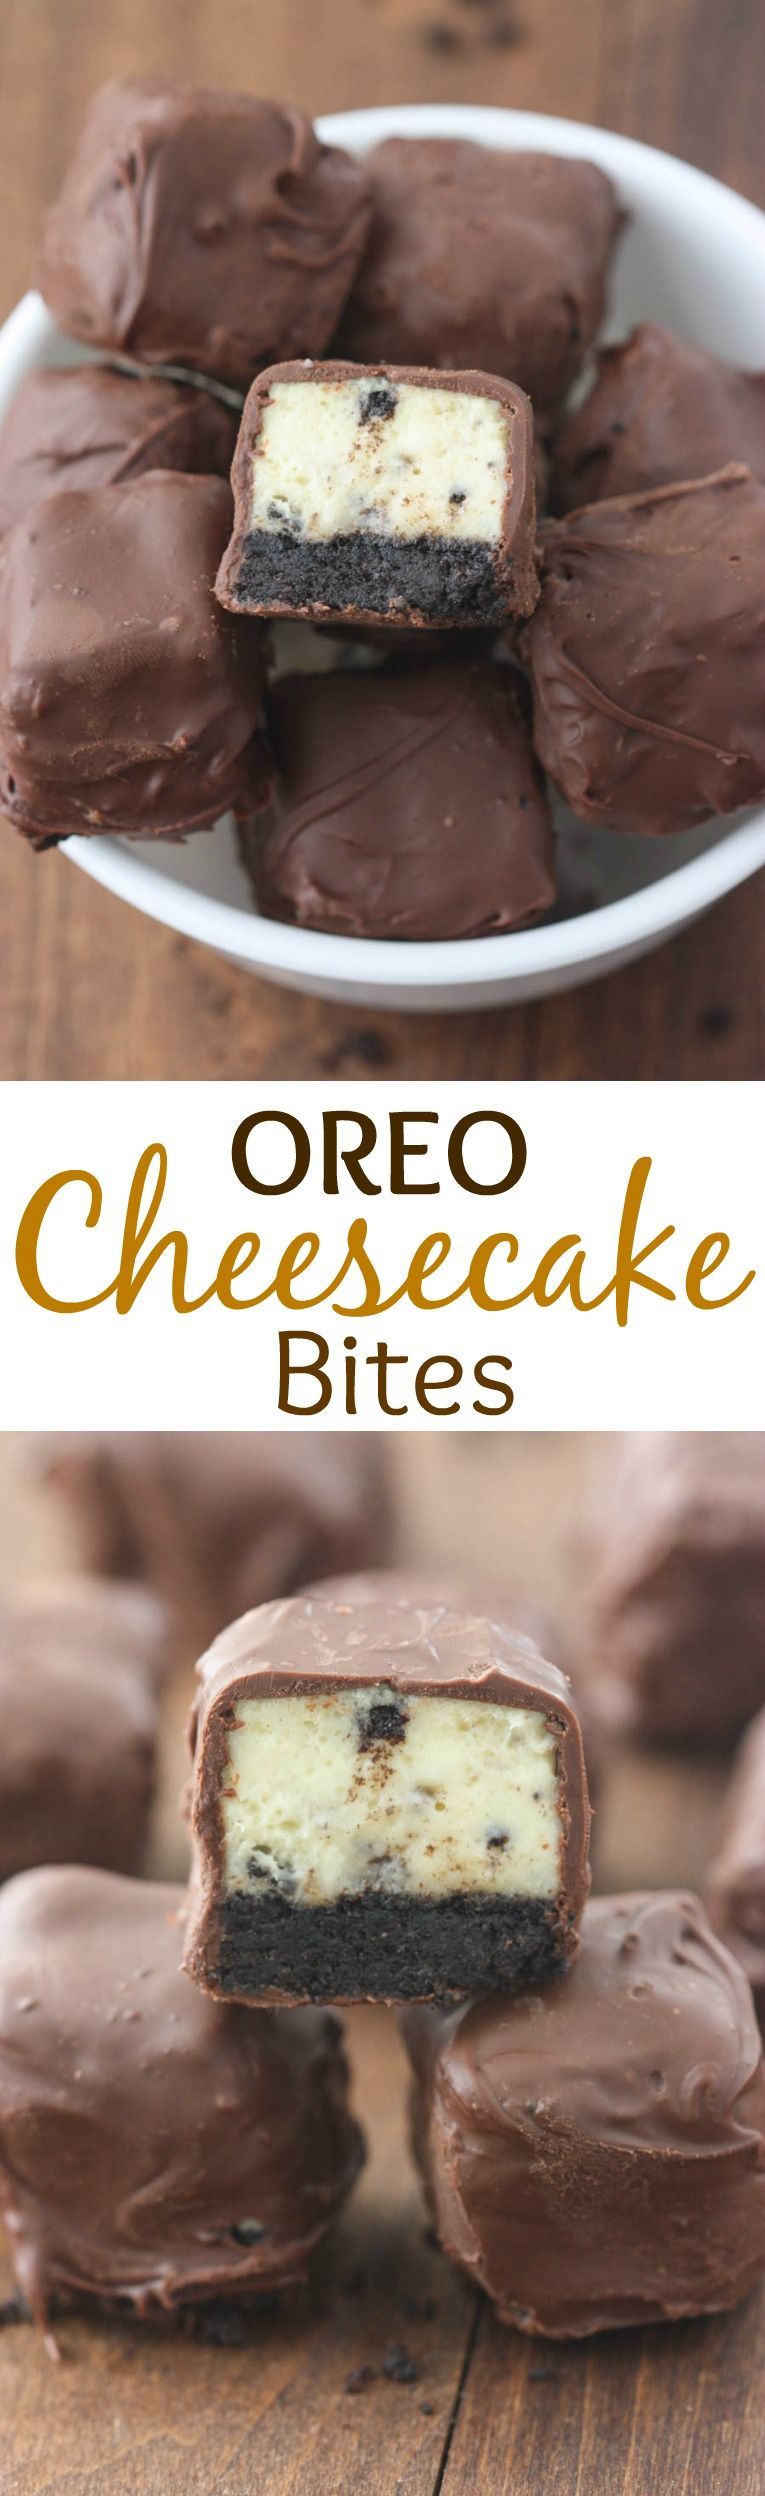 Oreo Cheesecake Bites – Oreo cheesecake recipe cut in squares and dipped in chocol